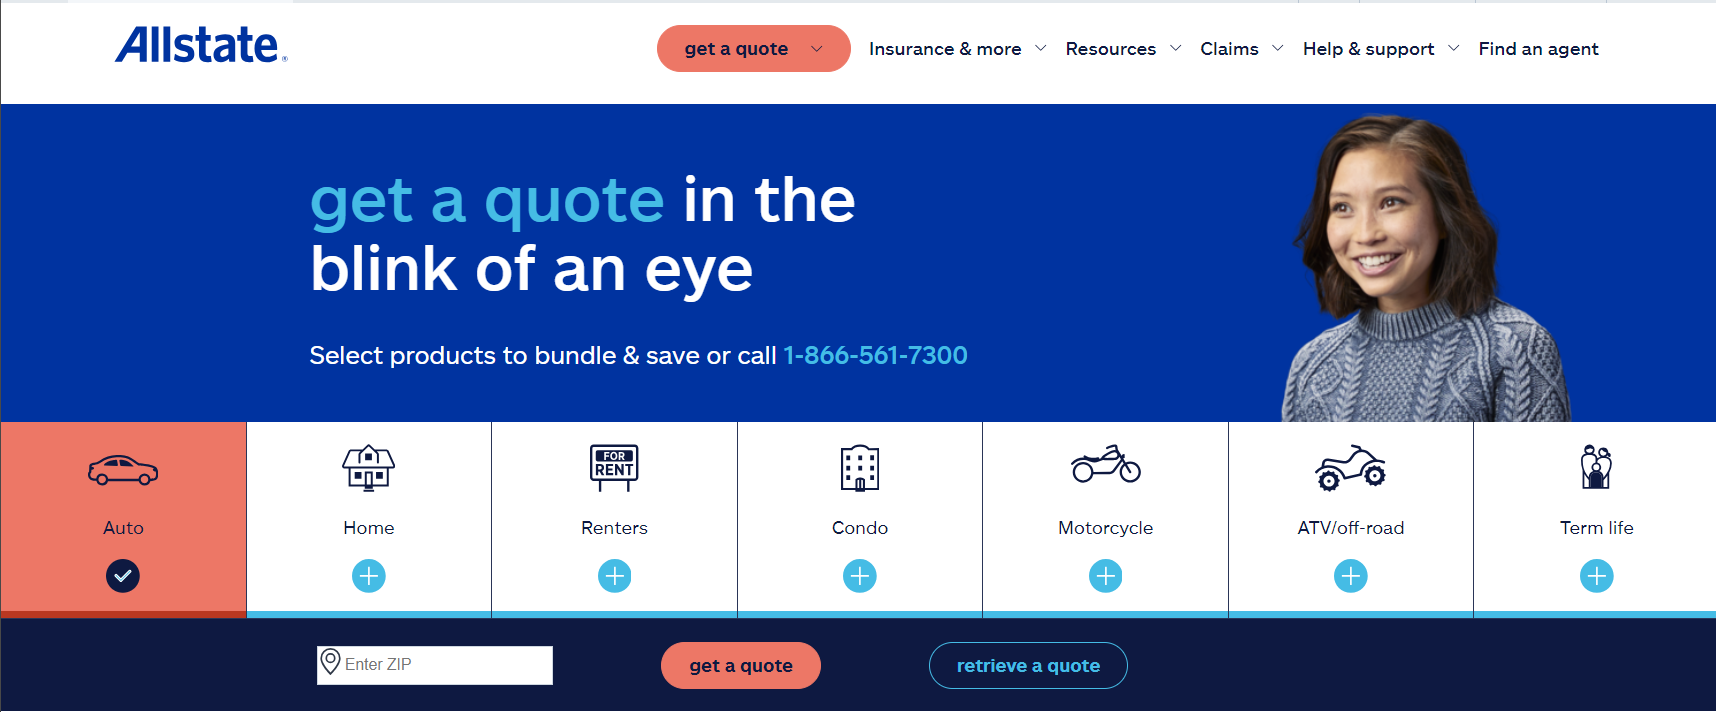 Allstate Site Screenshot: 10 Best Auto Insurance Companies for Accident Forgiveness